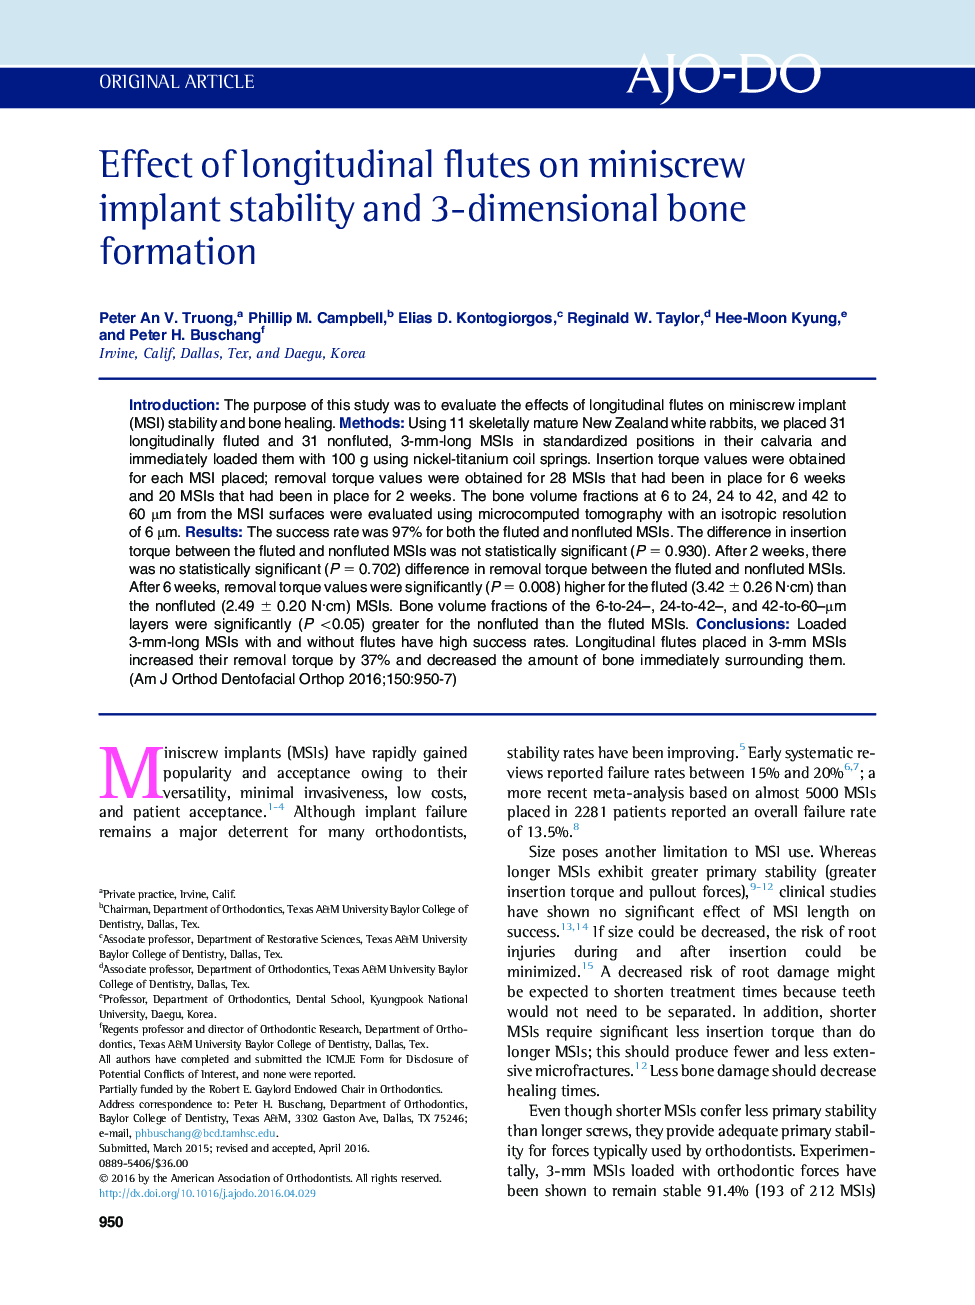 Effect of longitudinal flutes on miniscrew implant stability and 3-dimensional bone formation